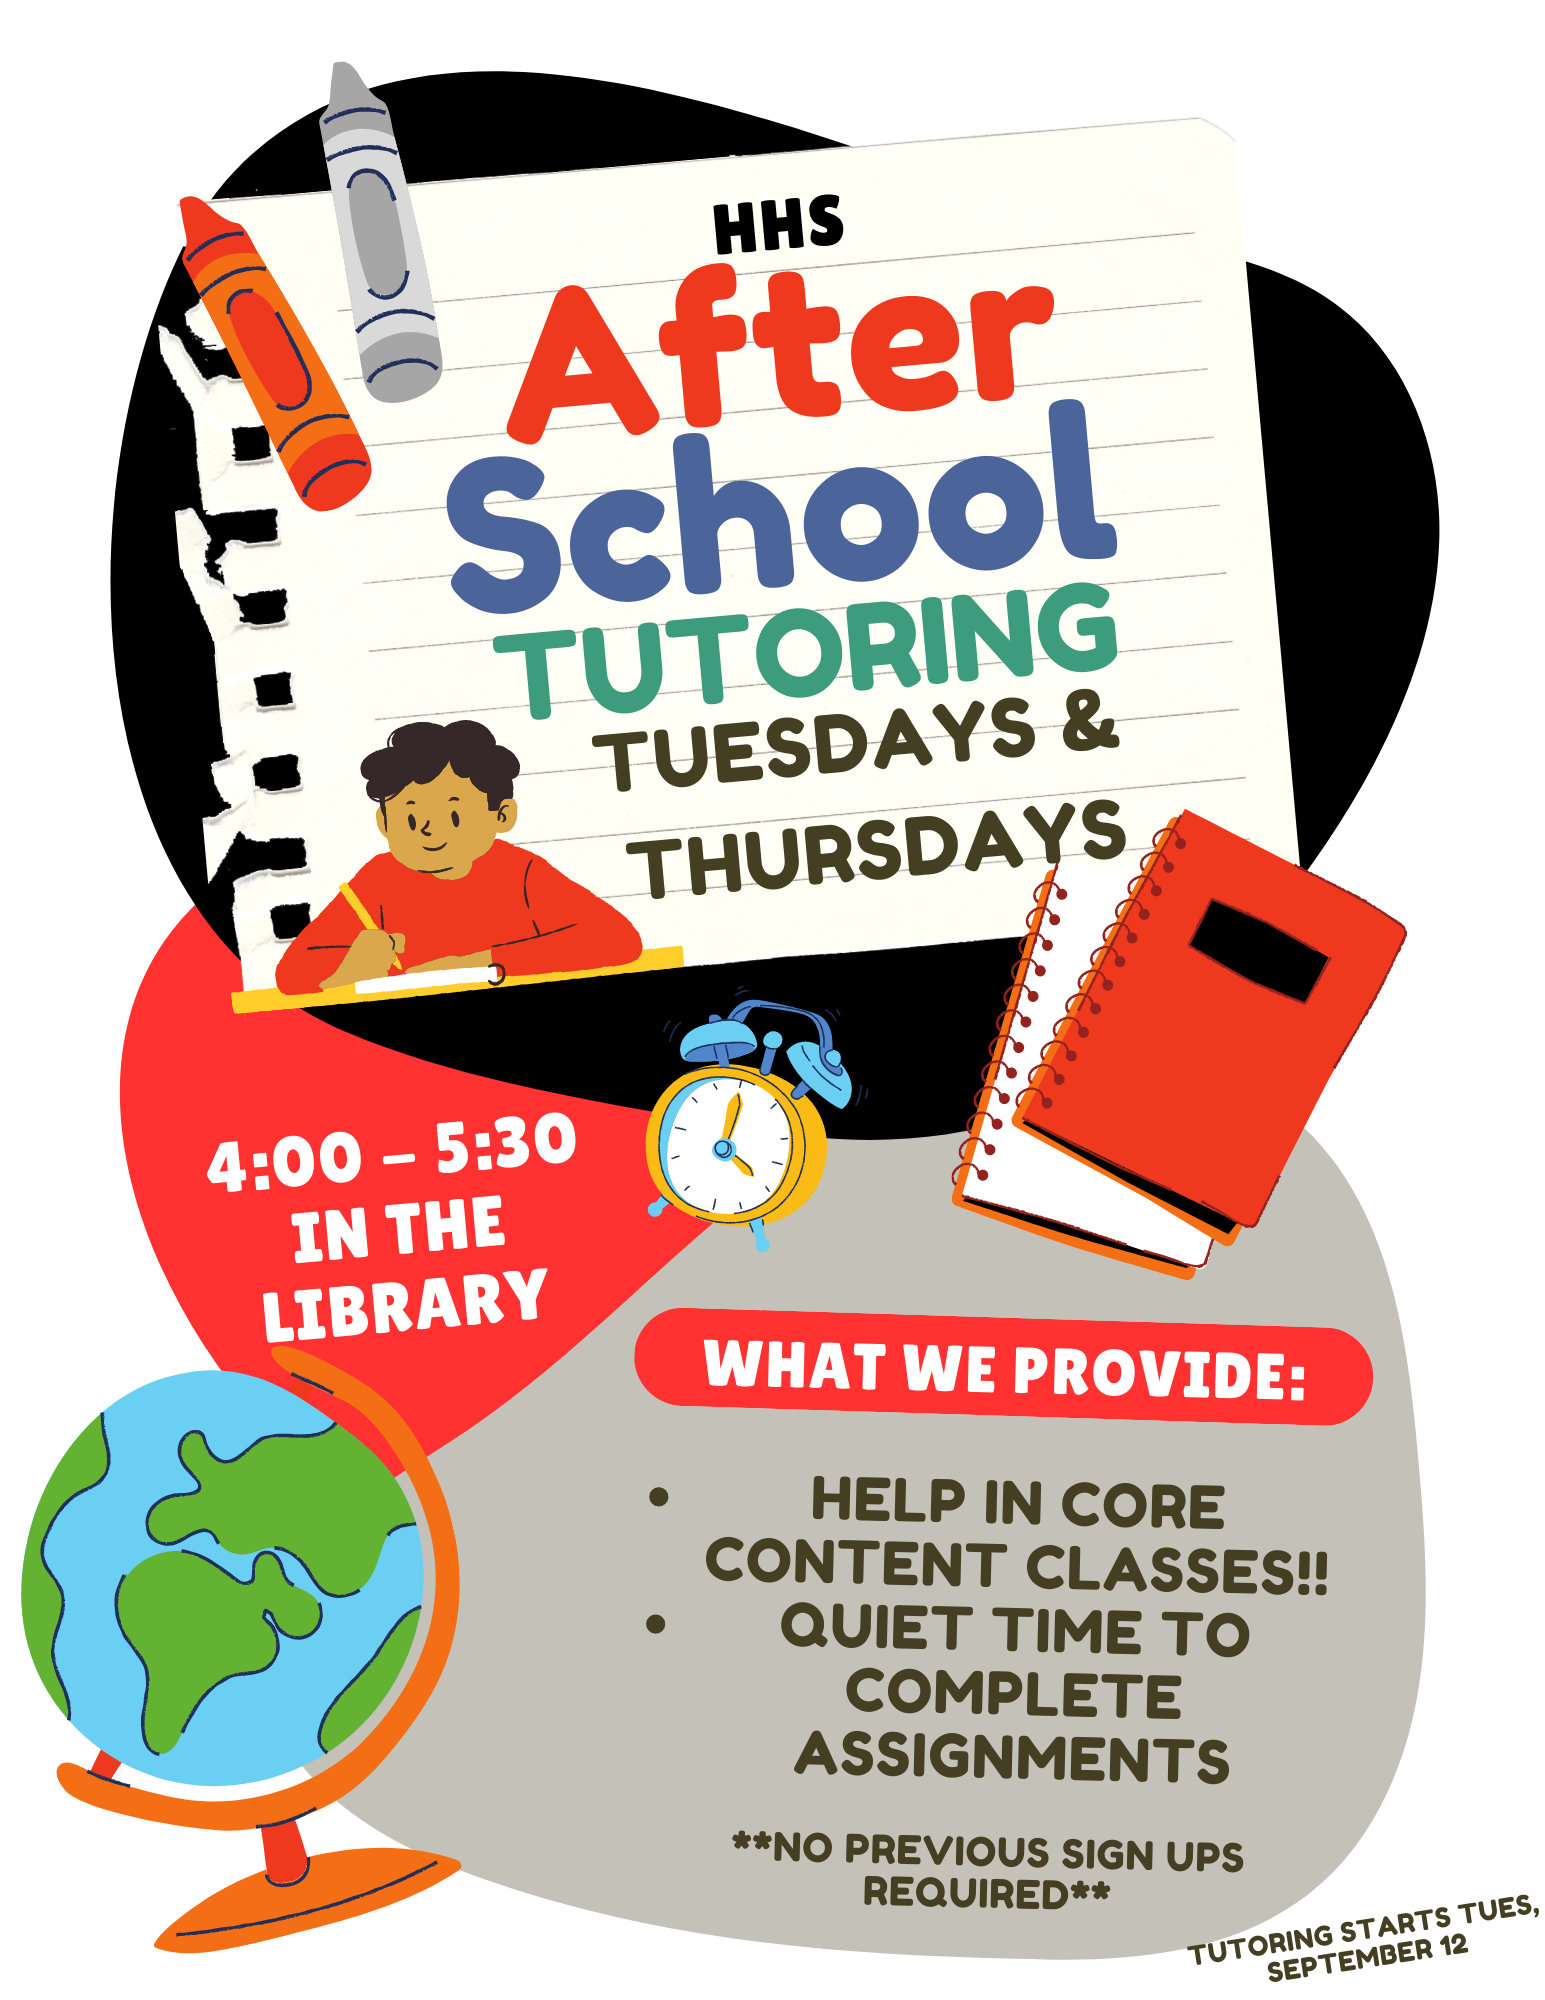 Flyer includes all information in the announcement. It is colorful with a cartoon student working, globe, crayons, and notebooks.